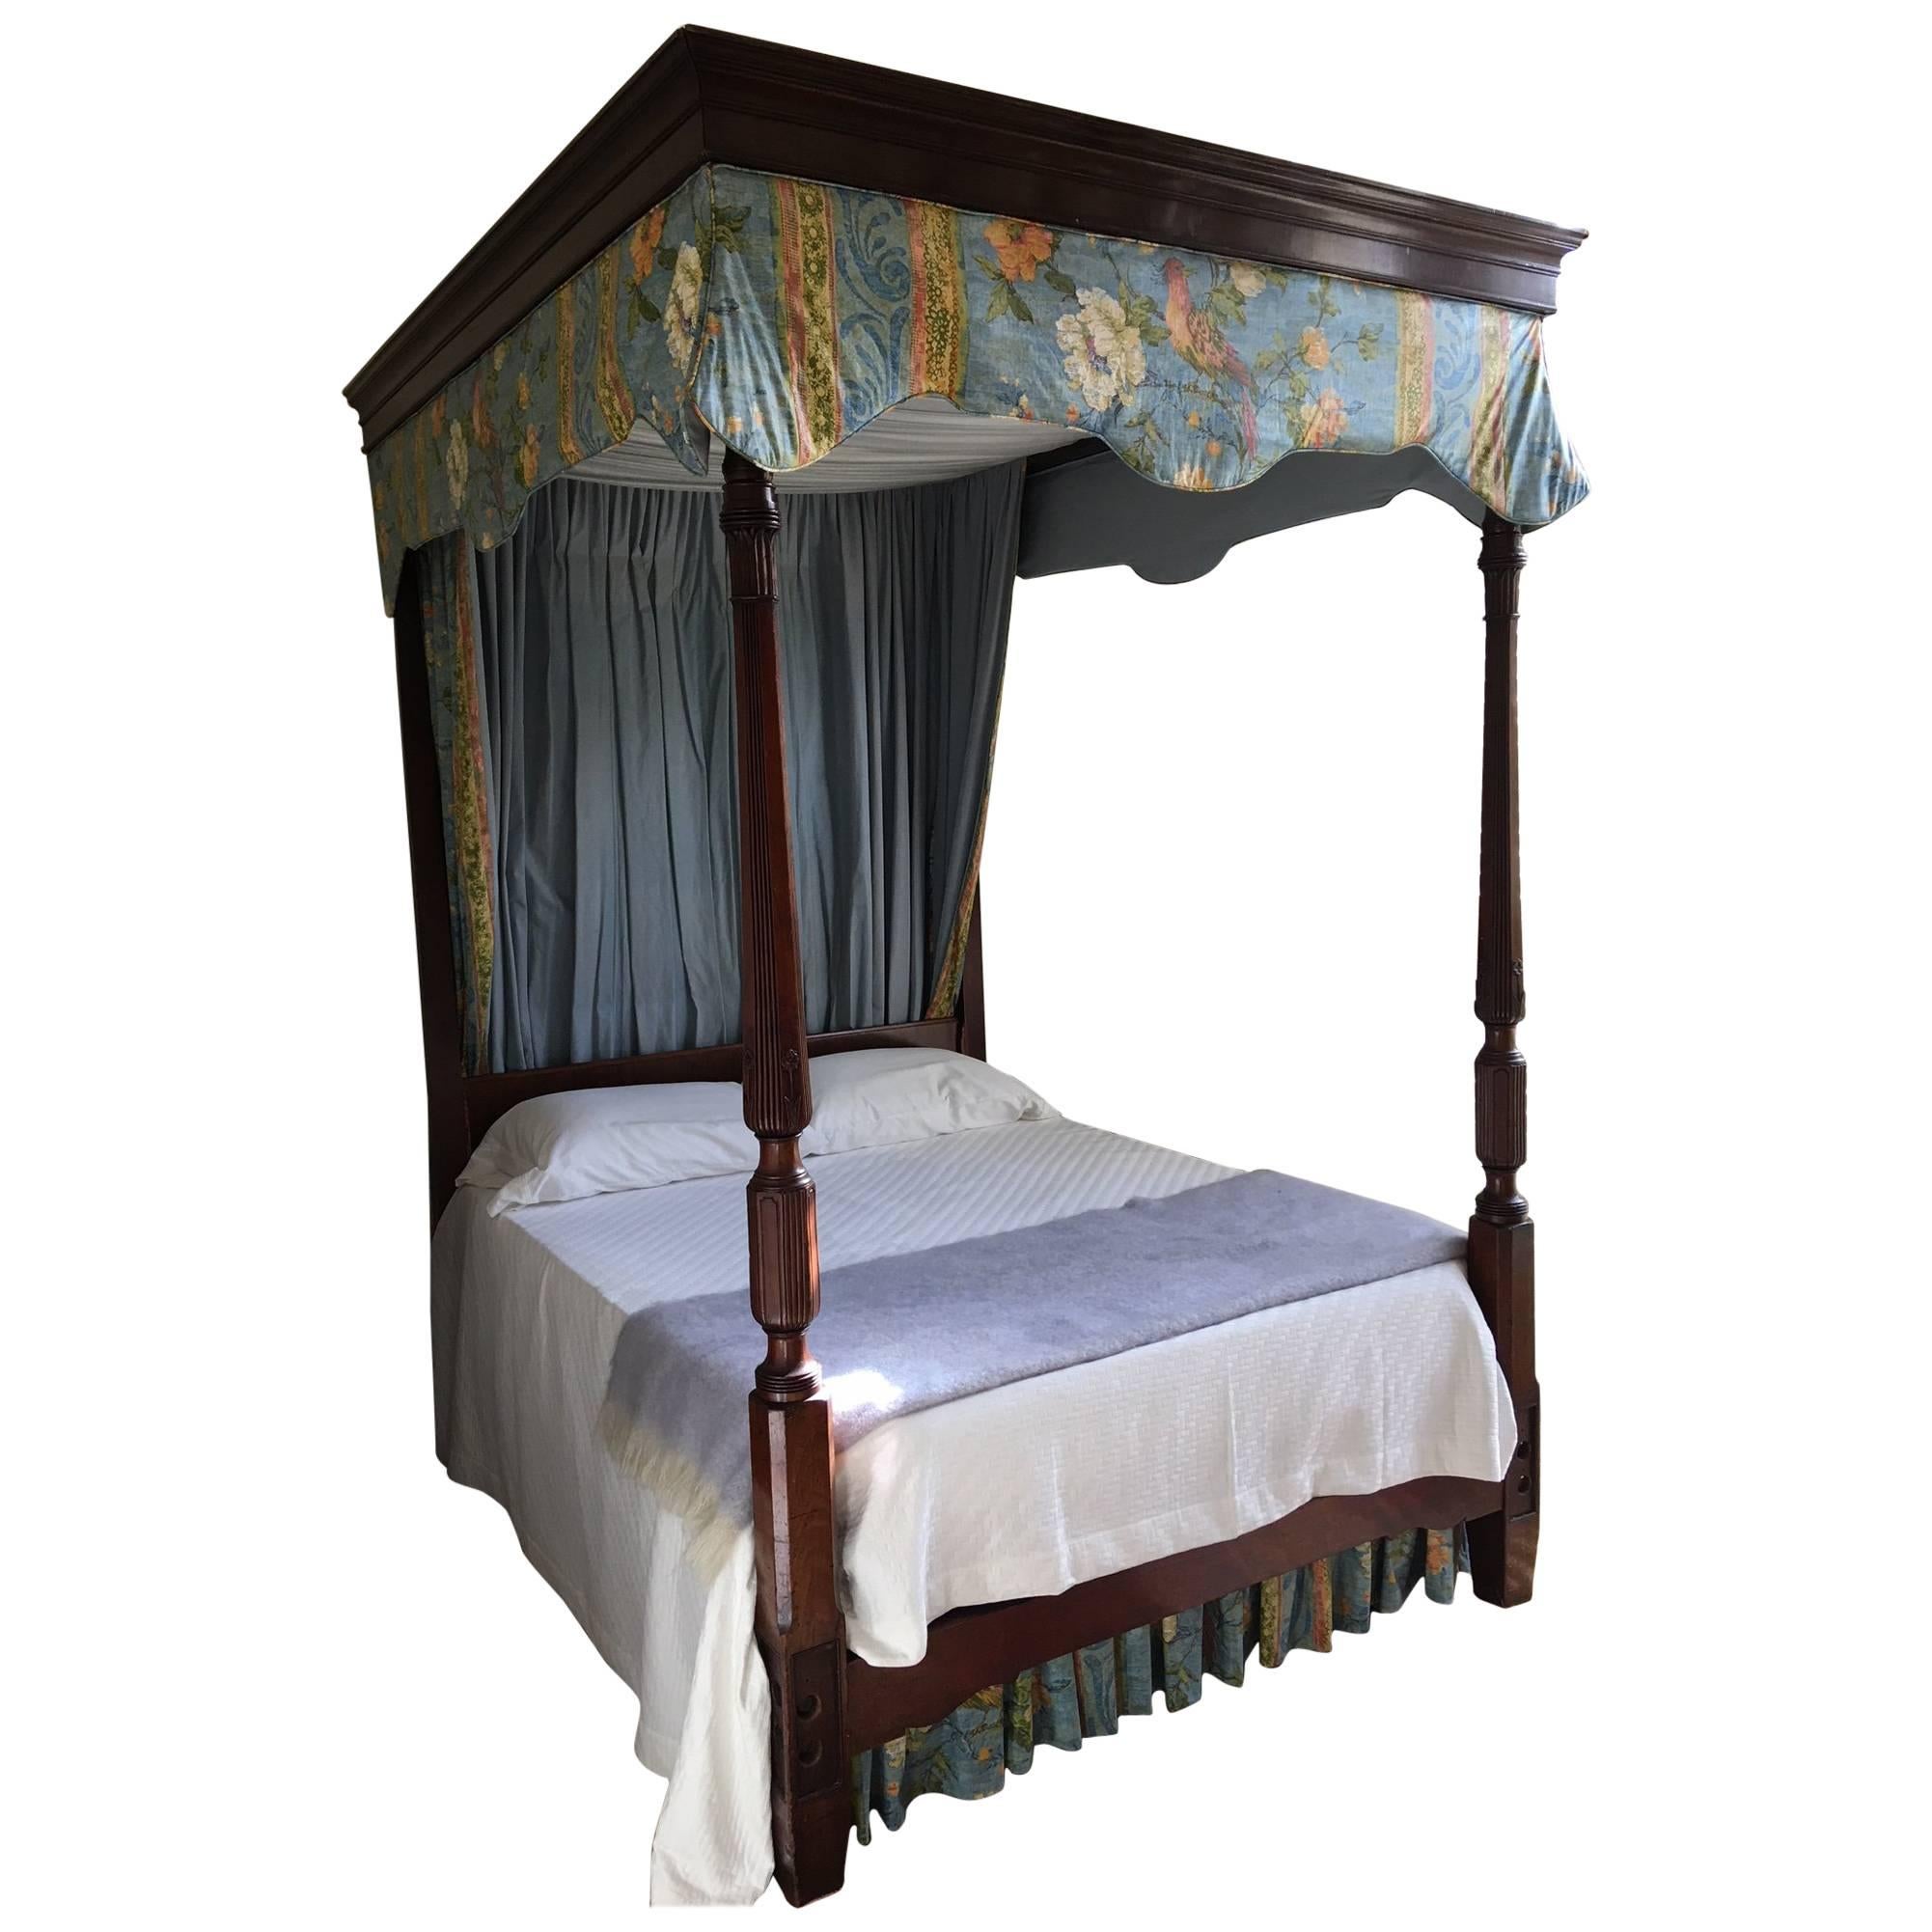 Carved Mahogany Four-Poster Bed with Canopy, 19th Century